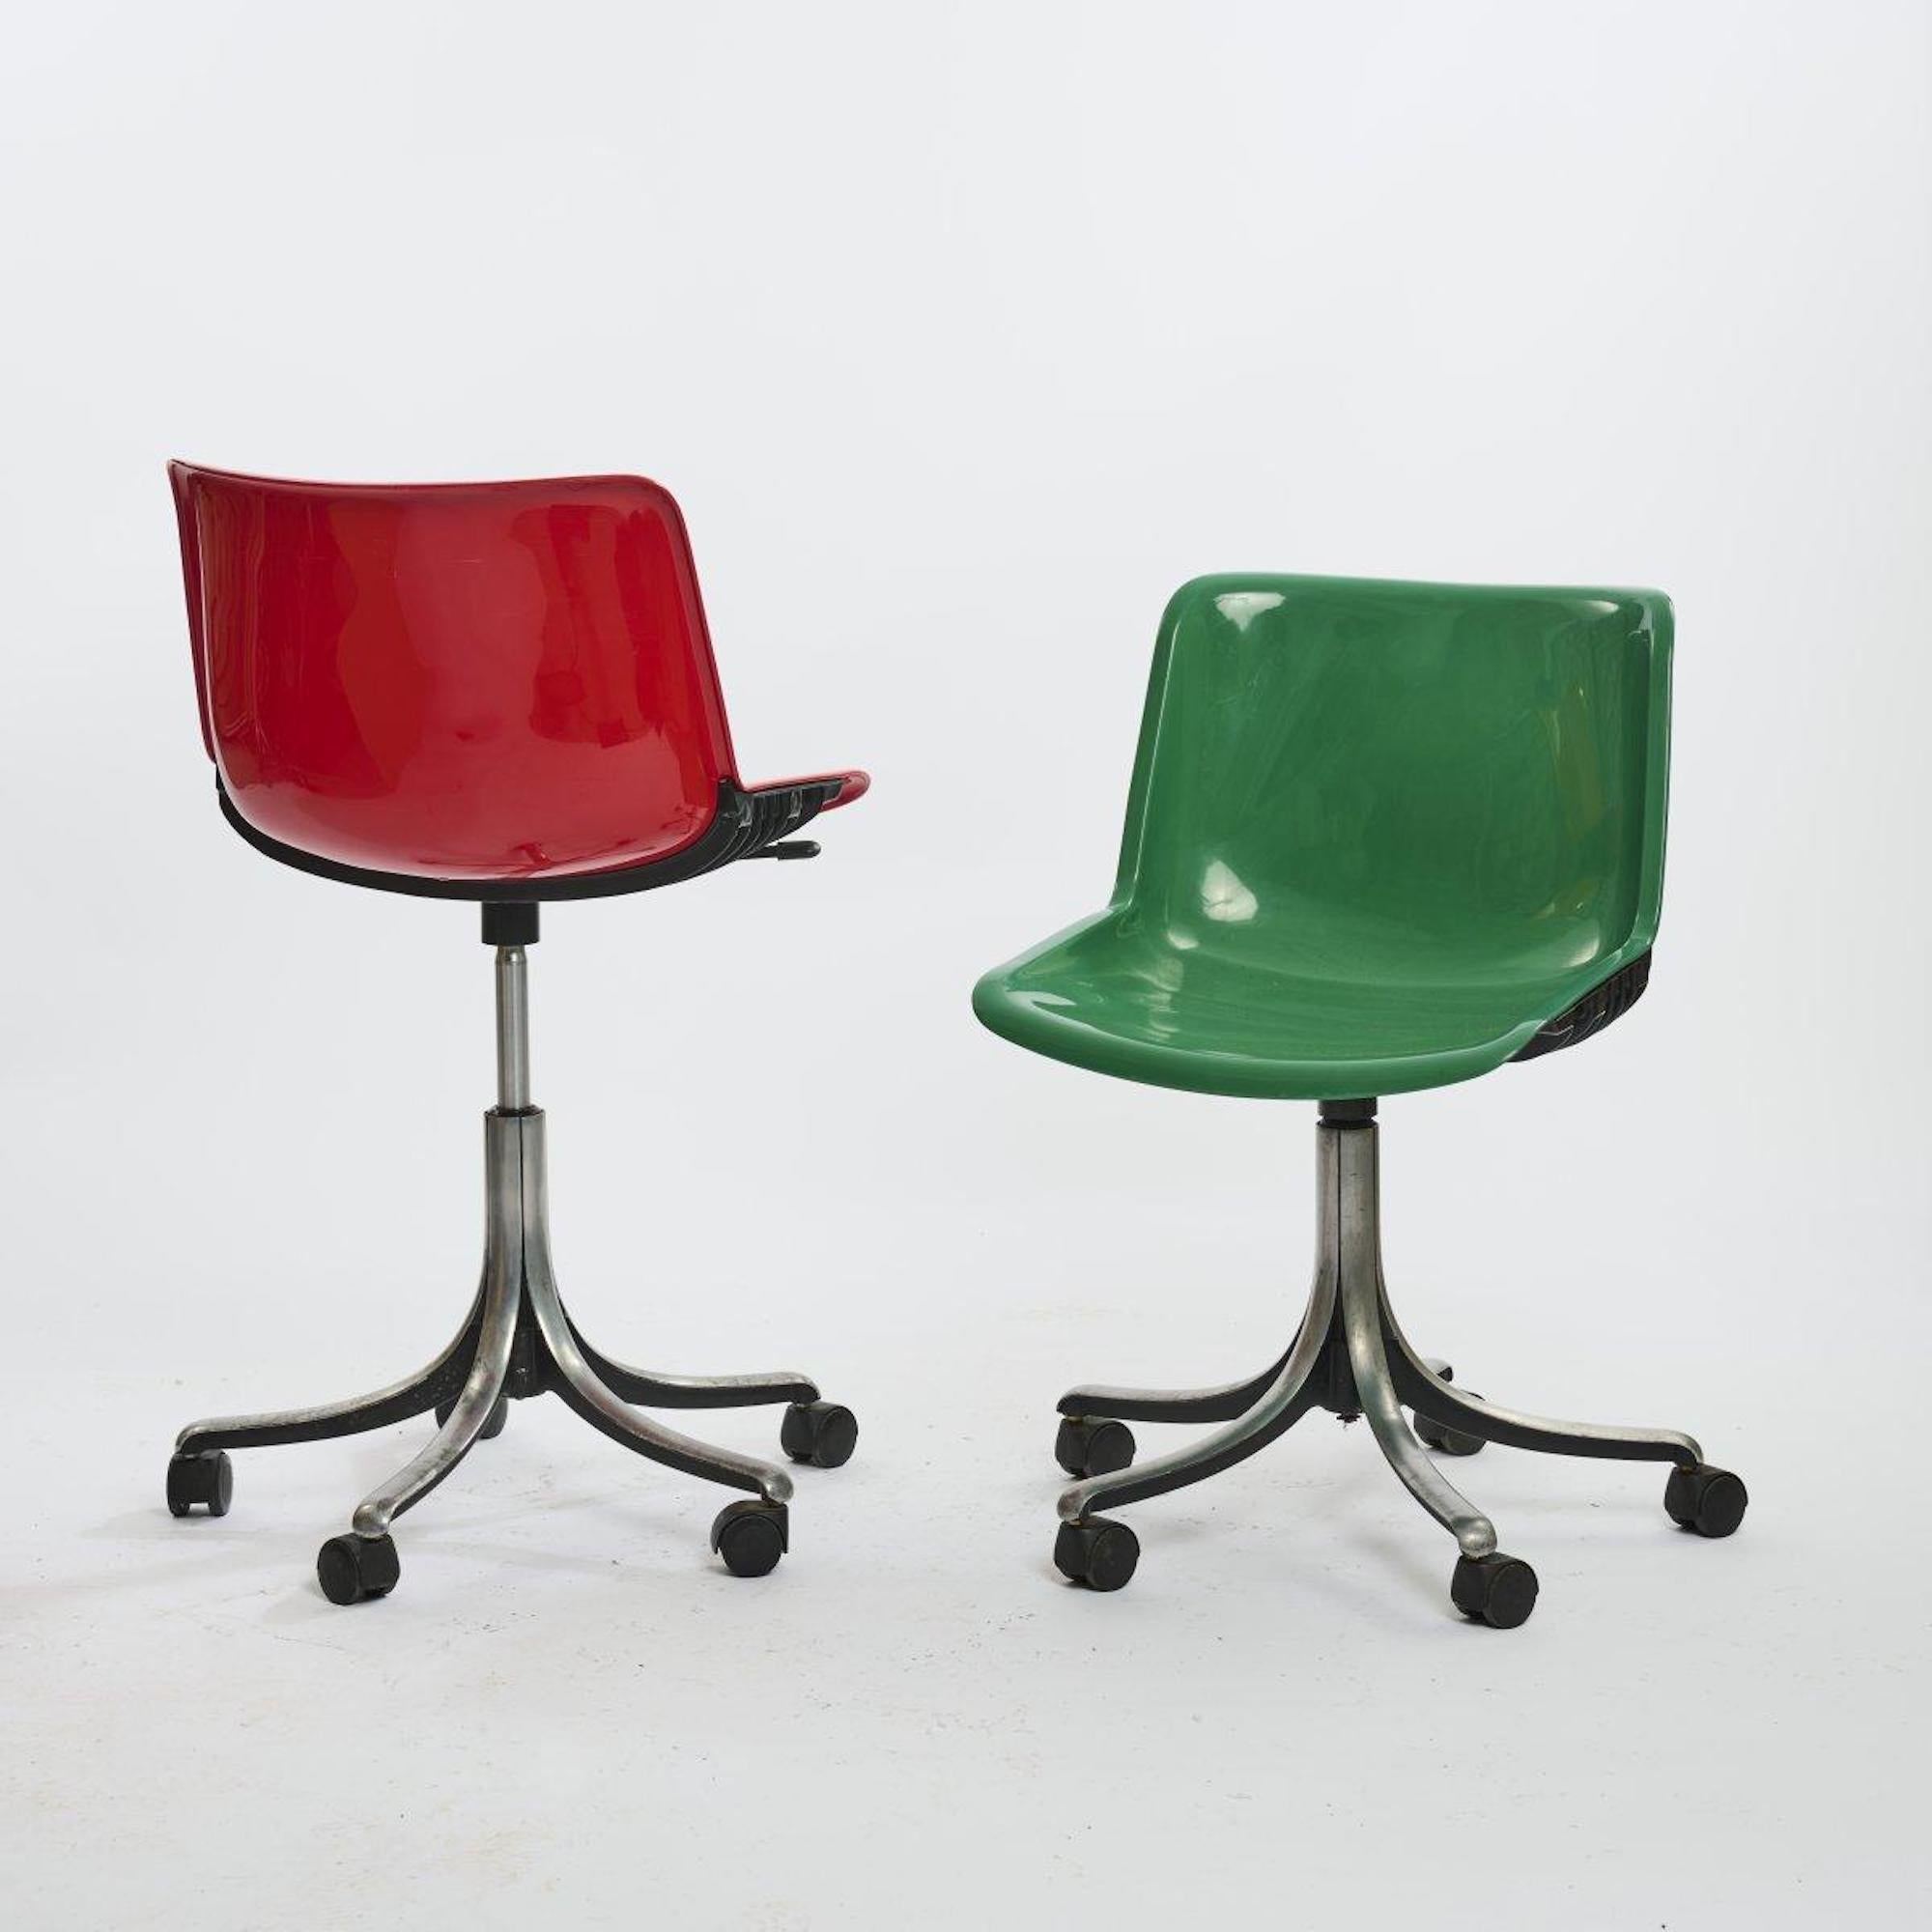 Four Modus work chairs made by Centro Progetti Tecno, 1972.

H. 75-88.5 x 48-56.5 x 52-53.5 cm.

Made by Tecno, Milan, 1978/1988.

Plastic, red, black, white and green, cast aluminum, partially painted, textile cover, black.

Marked: Manufacturer's